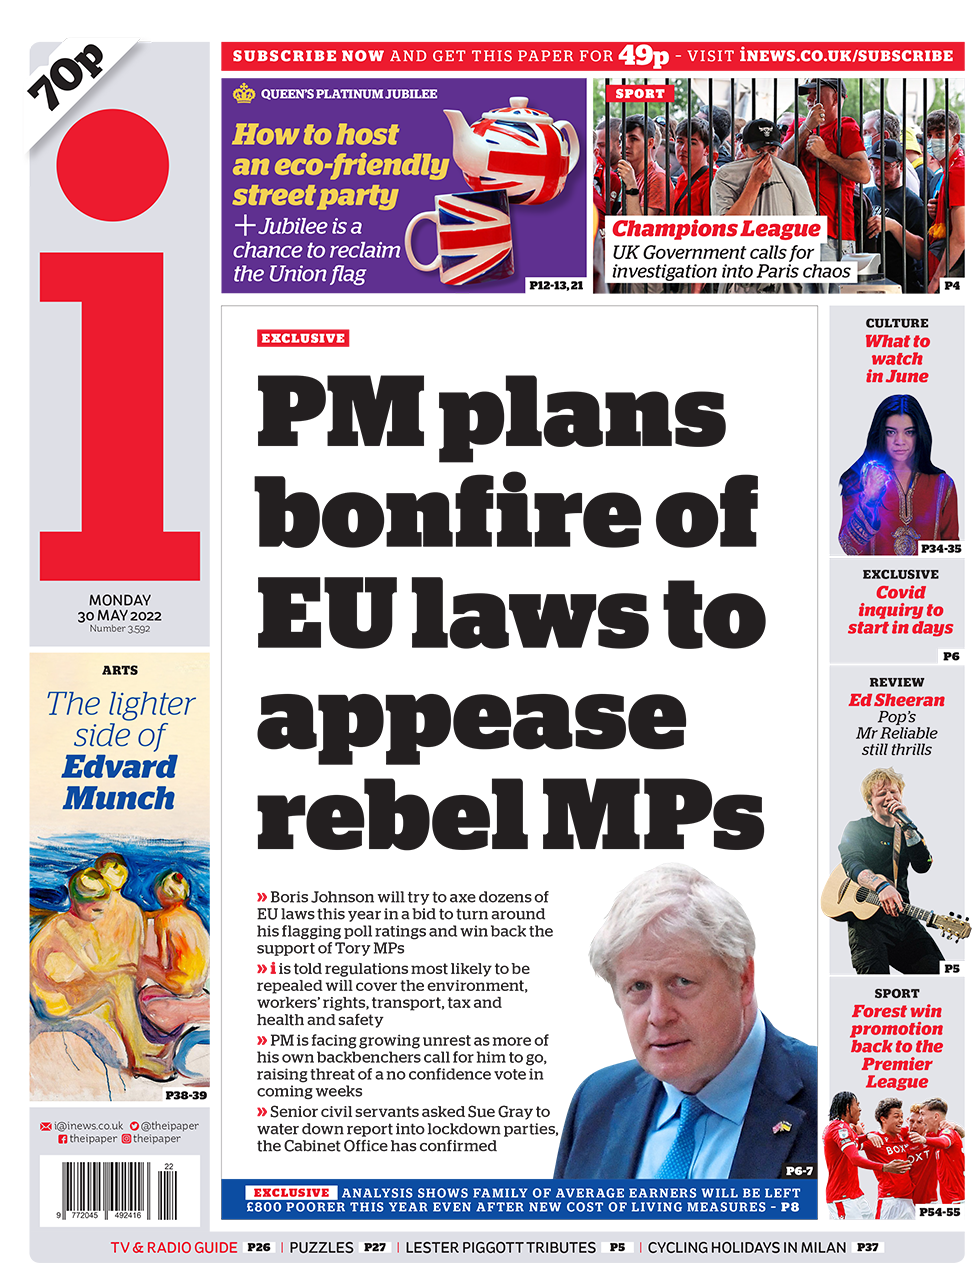 The headline in the i newspaper reads 'PM plans bonfire laws to appease rebel MPs'